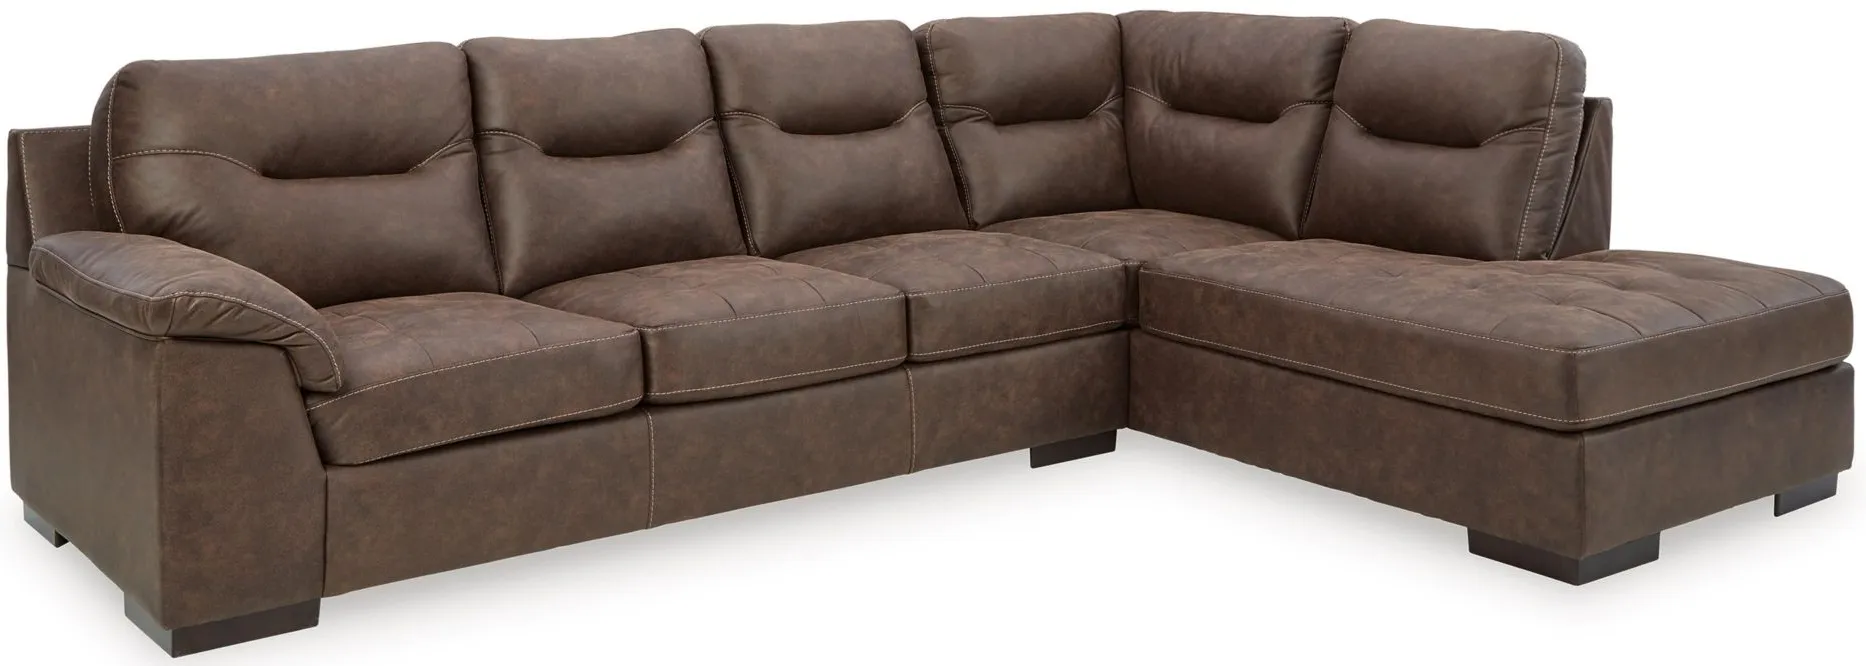 Maderla 2-pc. Sectional with Chaise in Walnut by Ashley Furniture